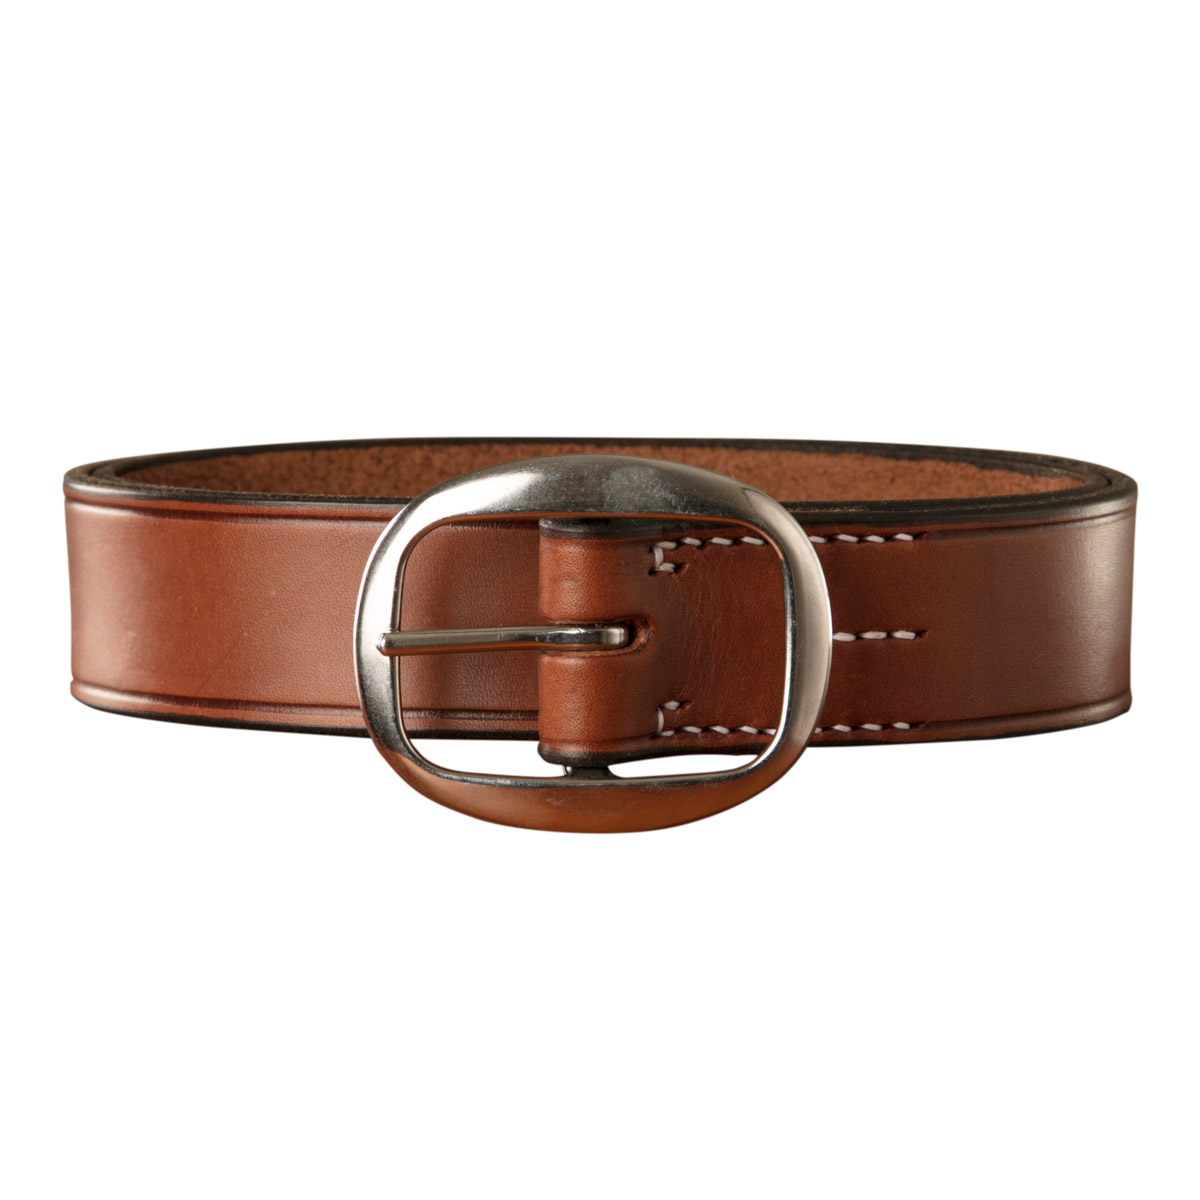 Stockmans Belt, Solid Leather, with Brass Swage Buckle - Plain 4